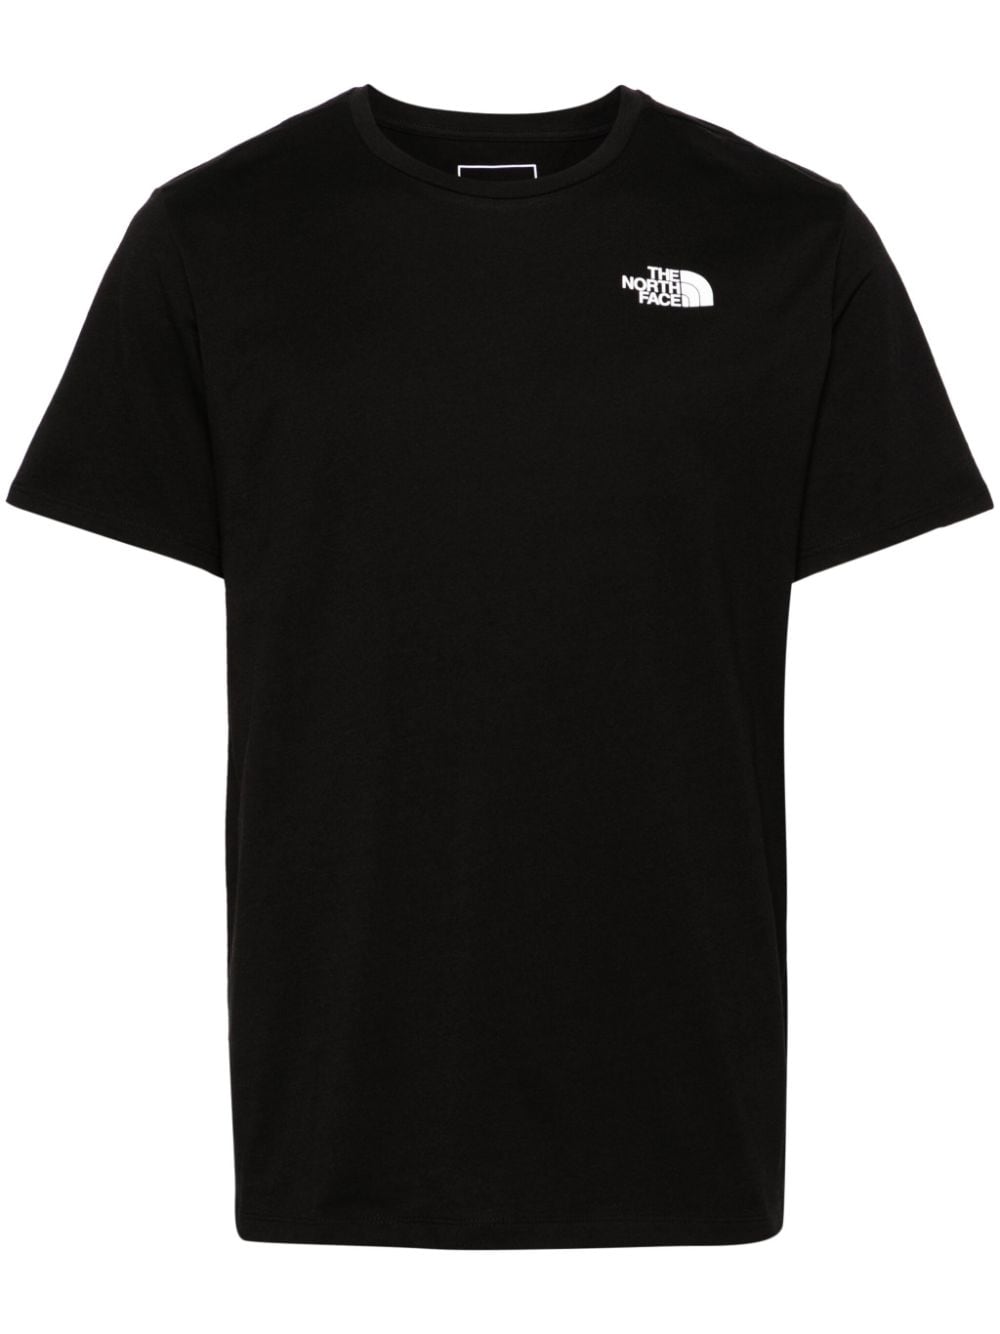 Image 1 of The North Face playera Foundation